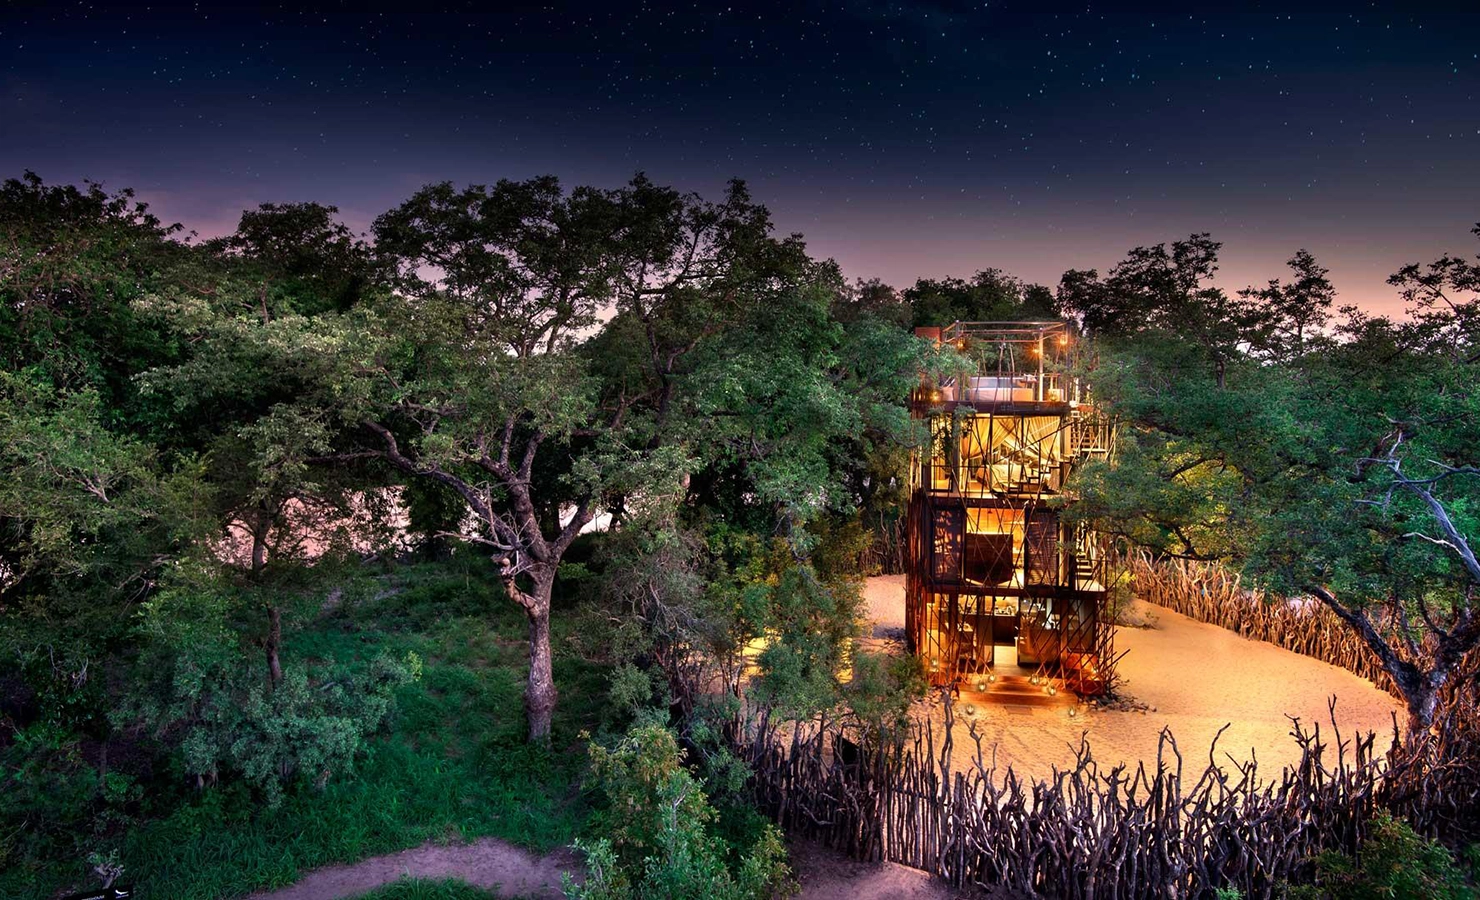 Whether you’re sleeping under the stars in a treehouse like this one at Ngala or a five-star lodge, we suggest you pack light… you’ll never wear everything